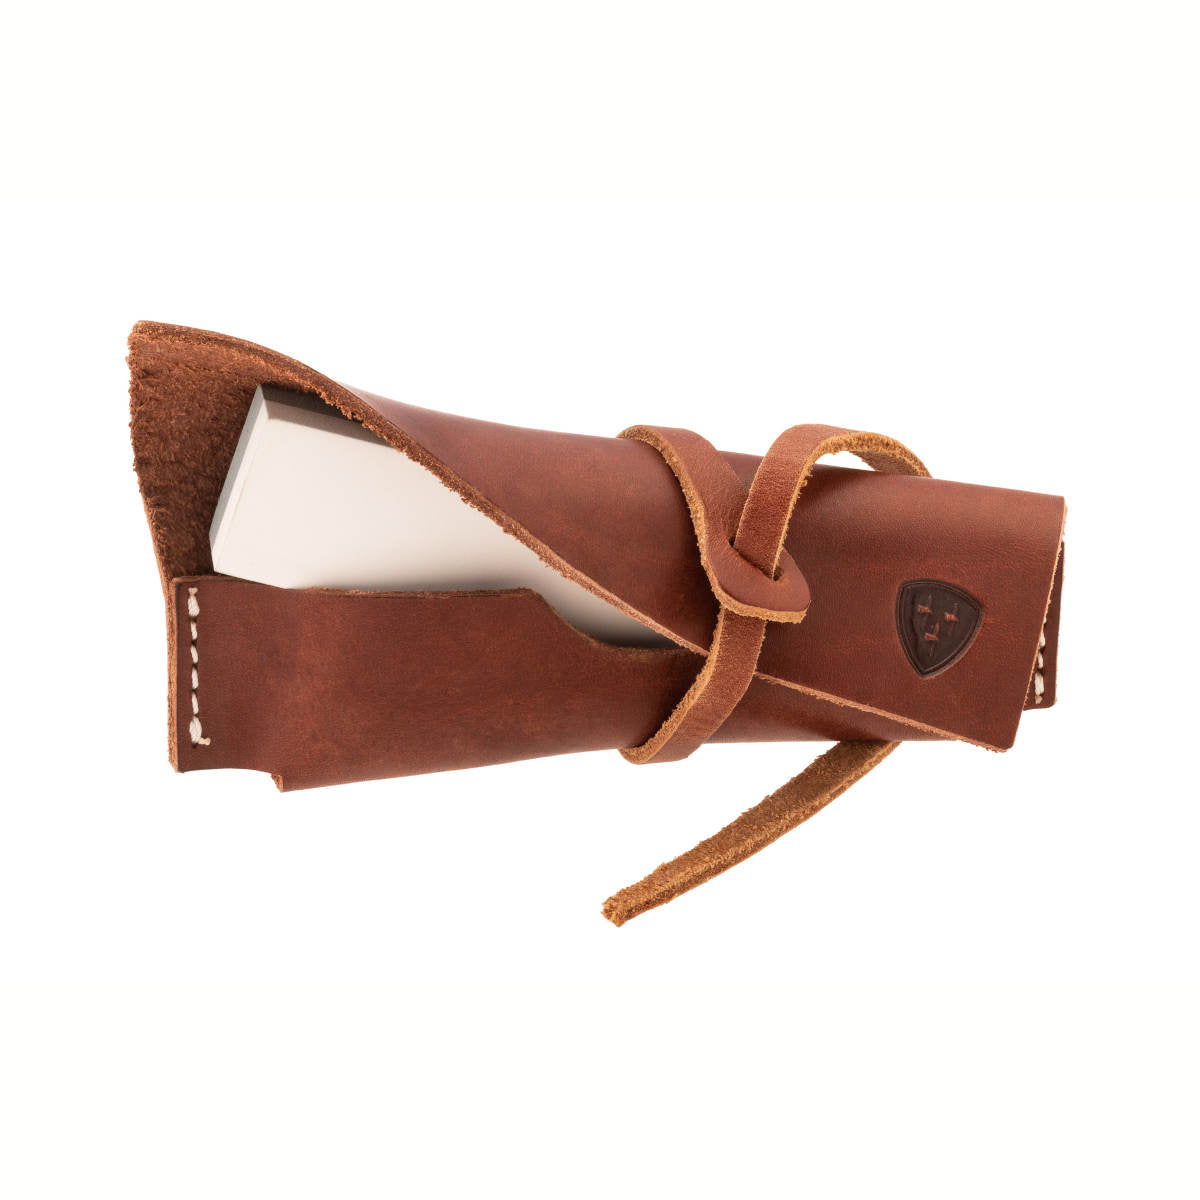 Sharpening stone S with leather holster